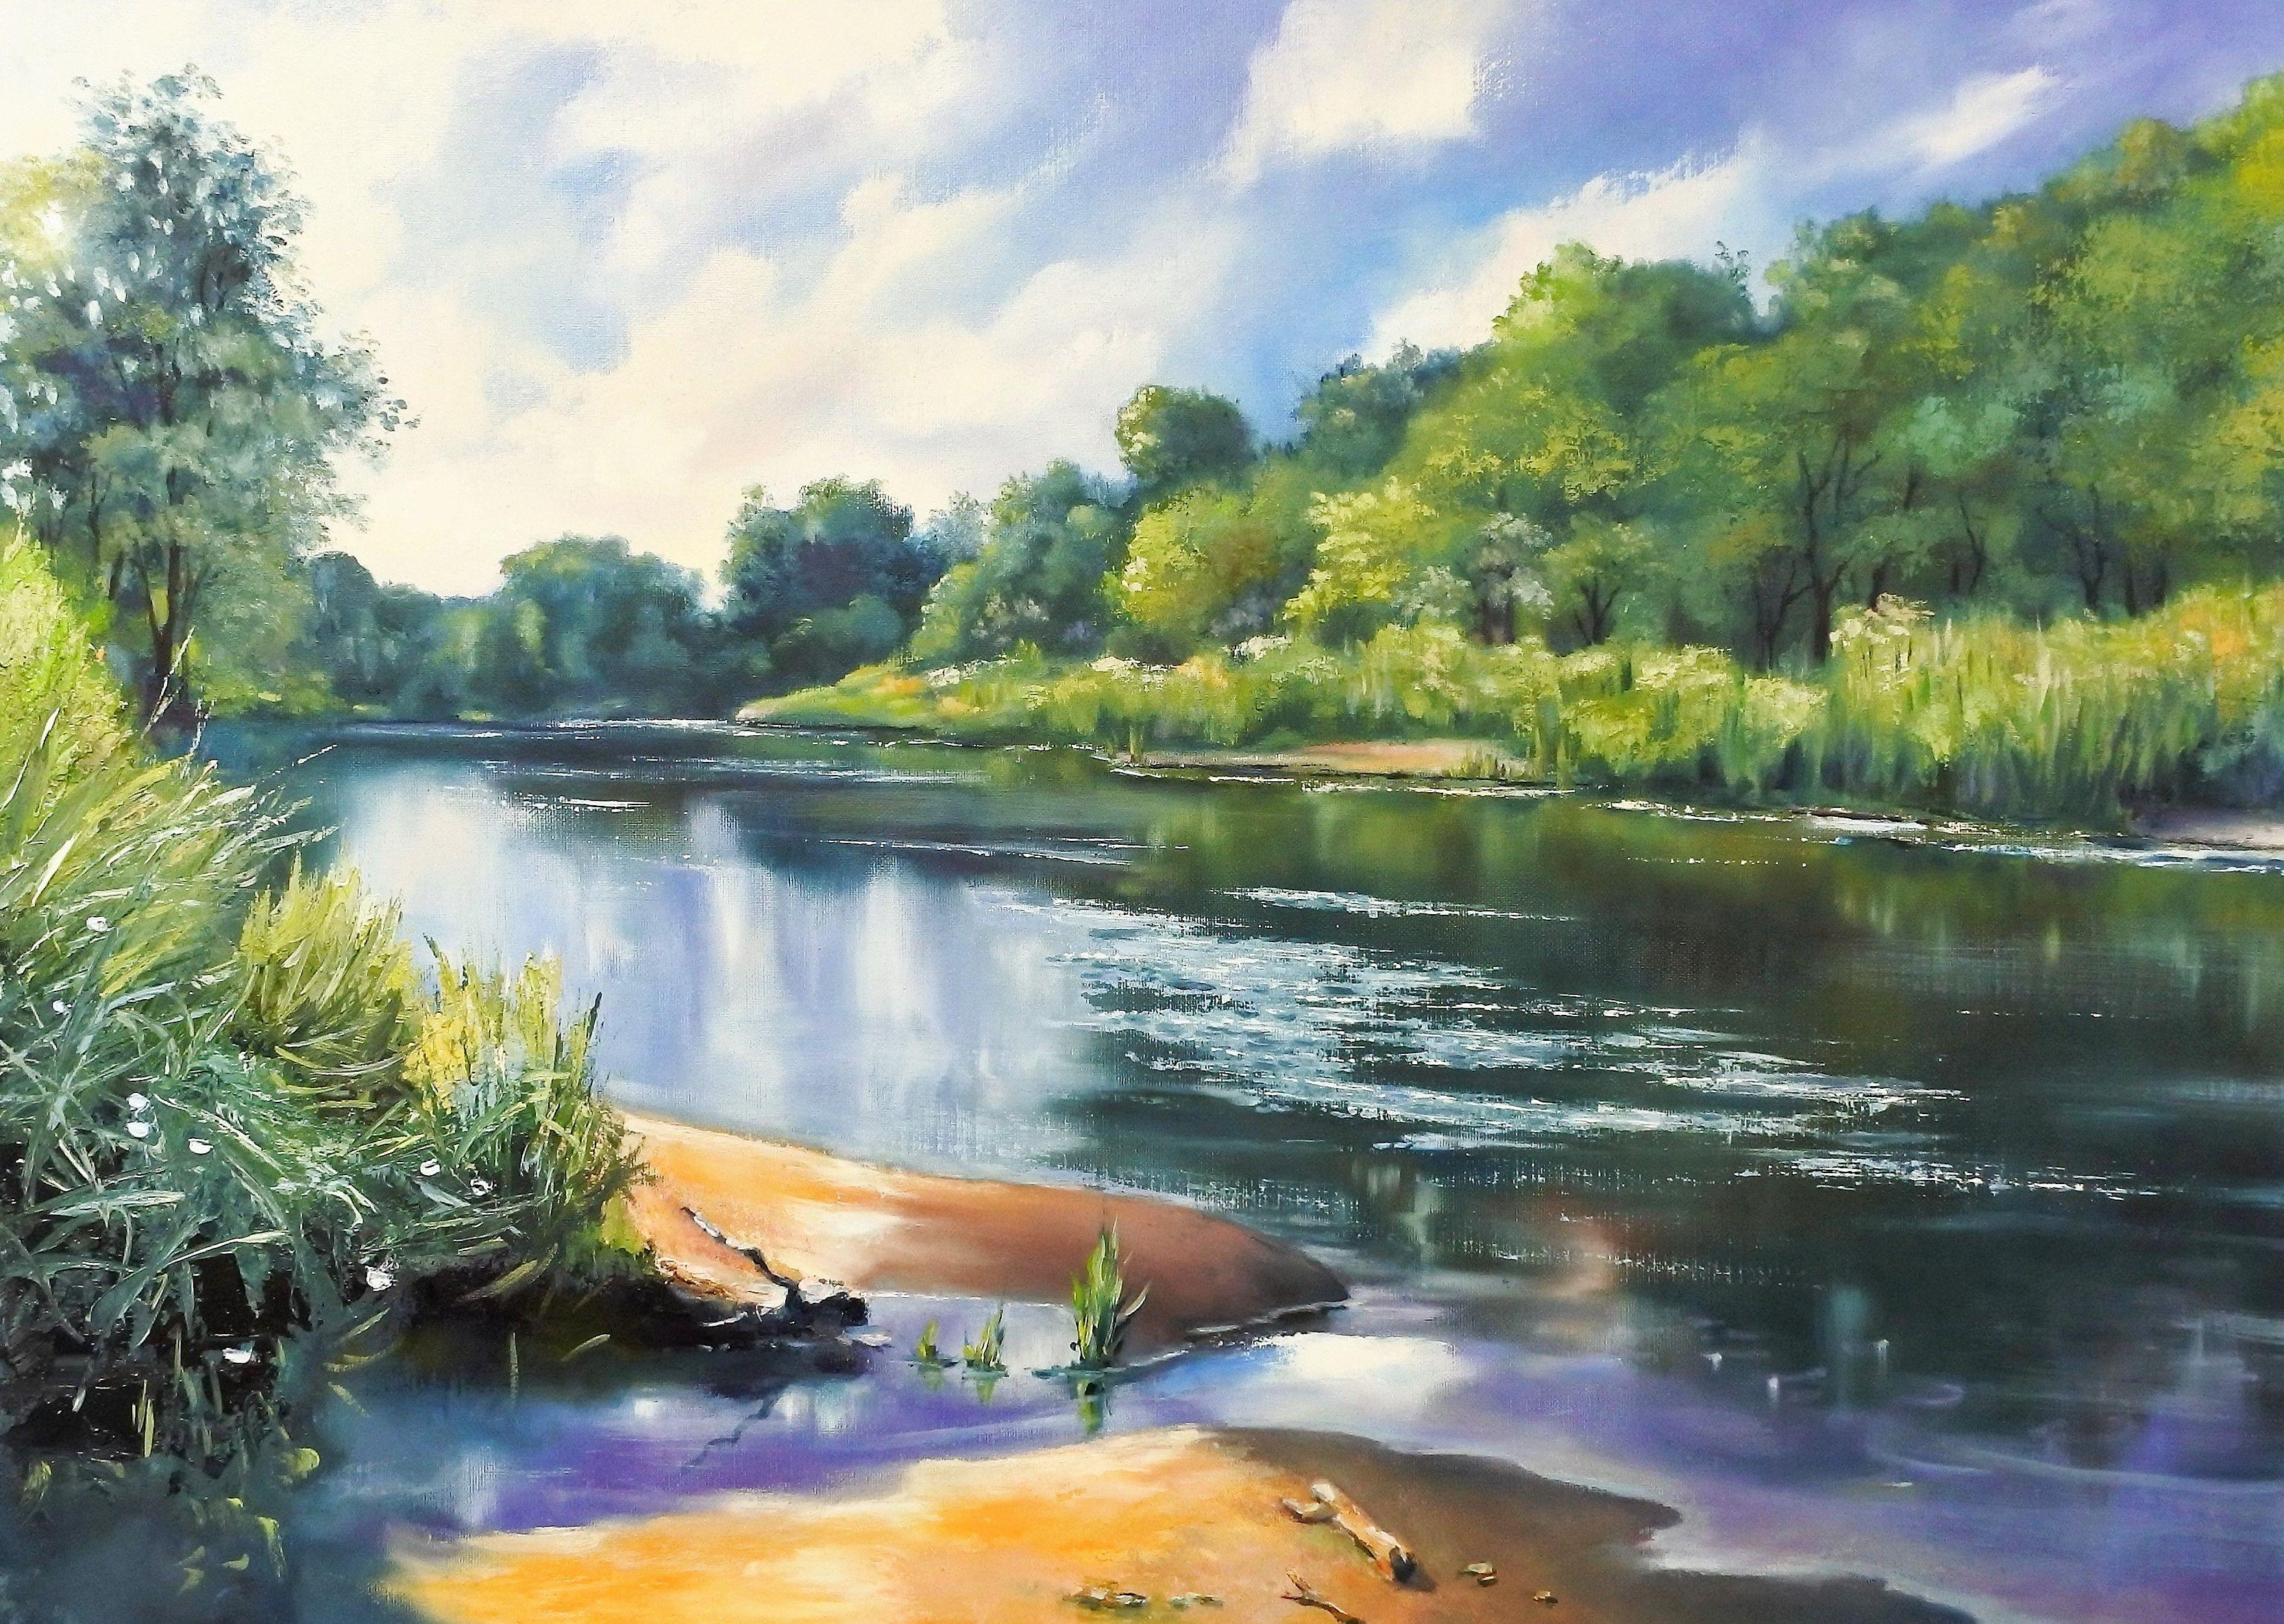 By the river, Painting, Oil on Canvas